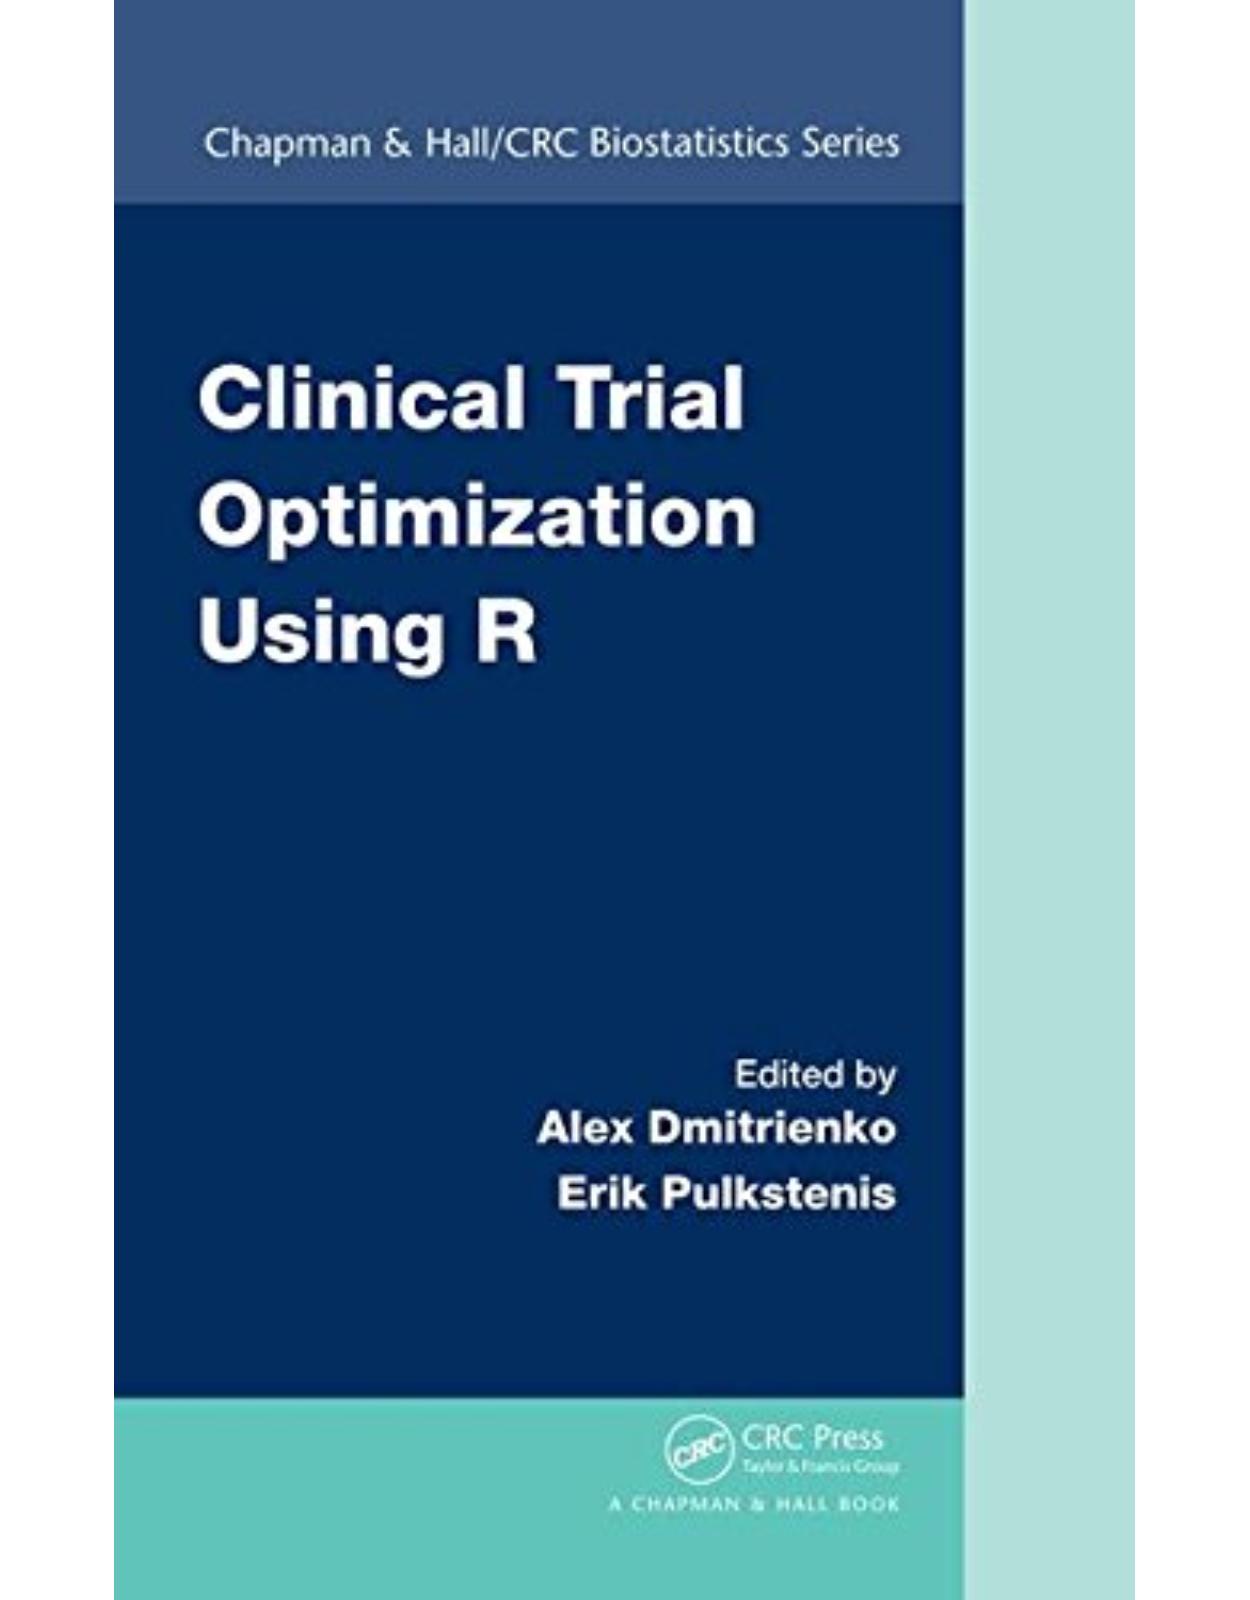 Clinical Trial Optimization Using R